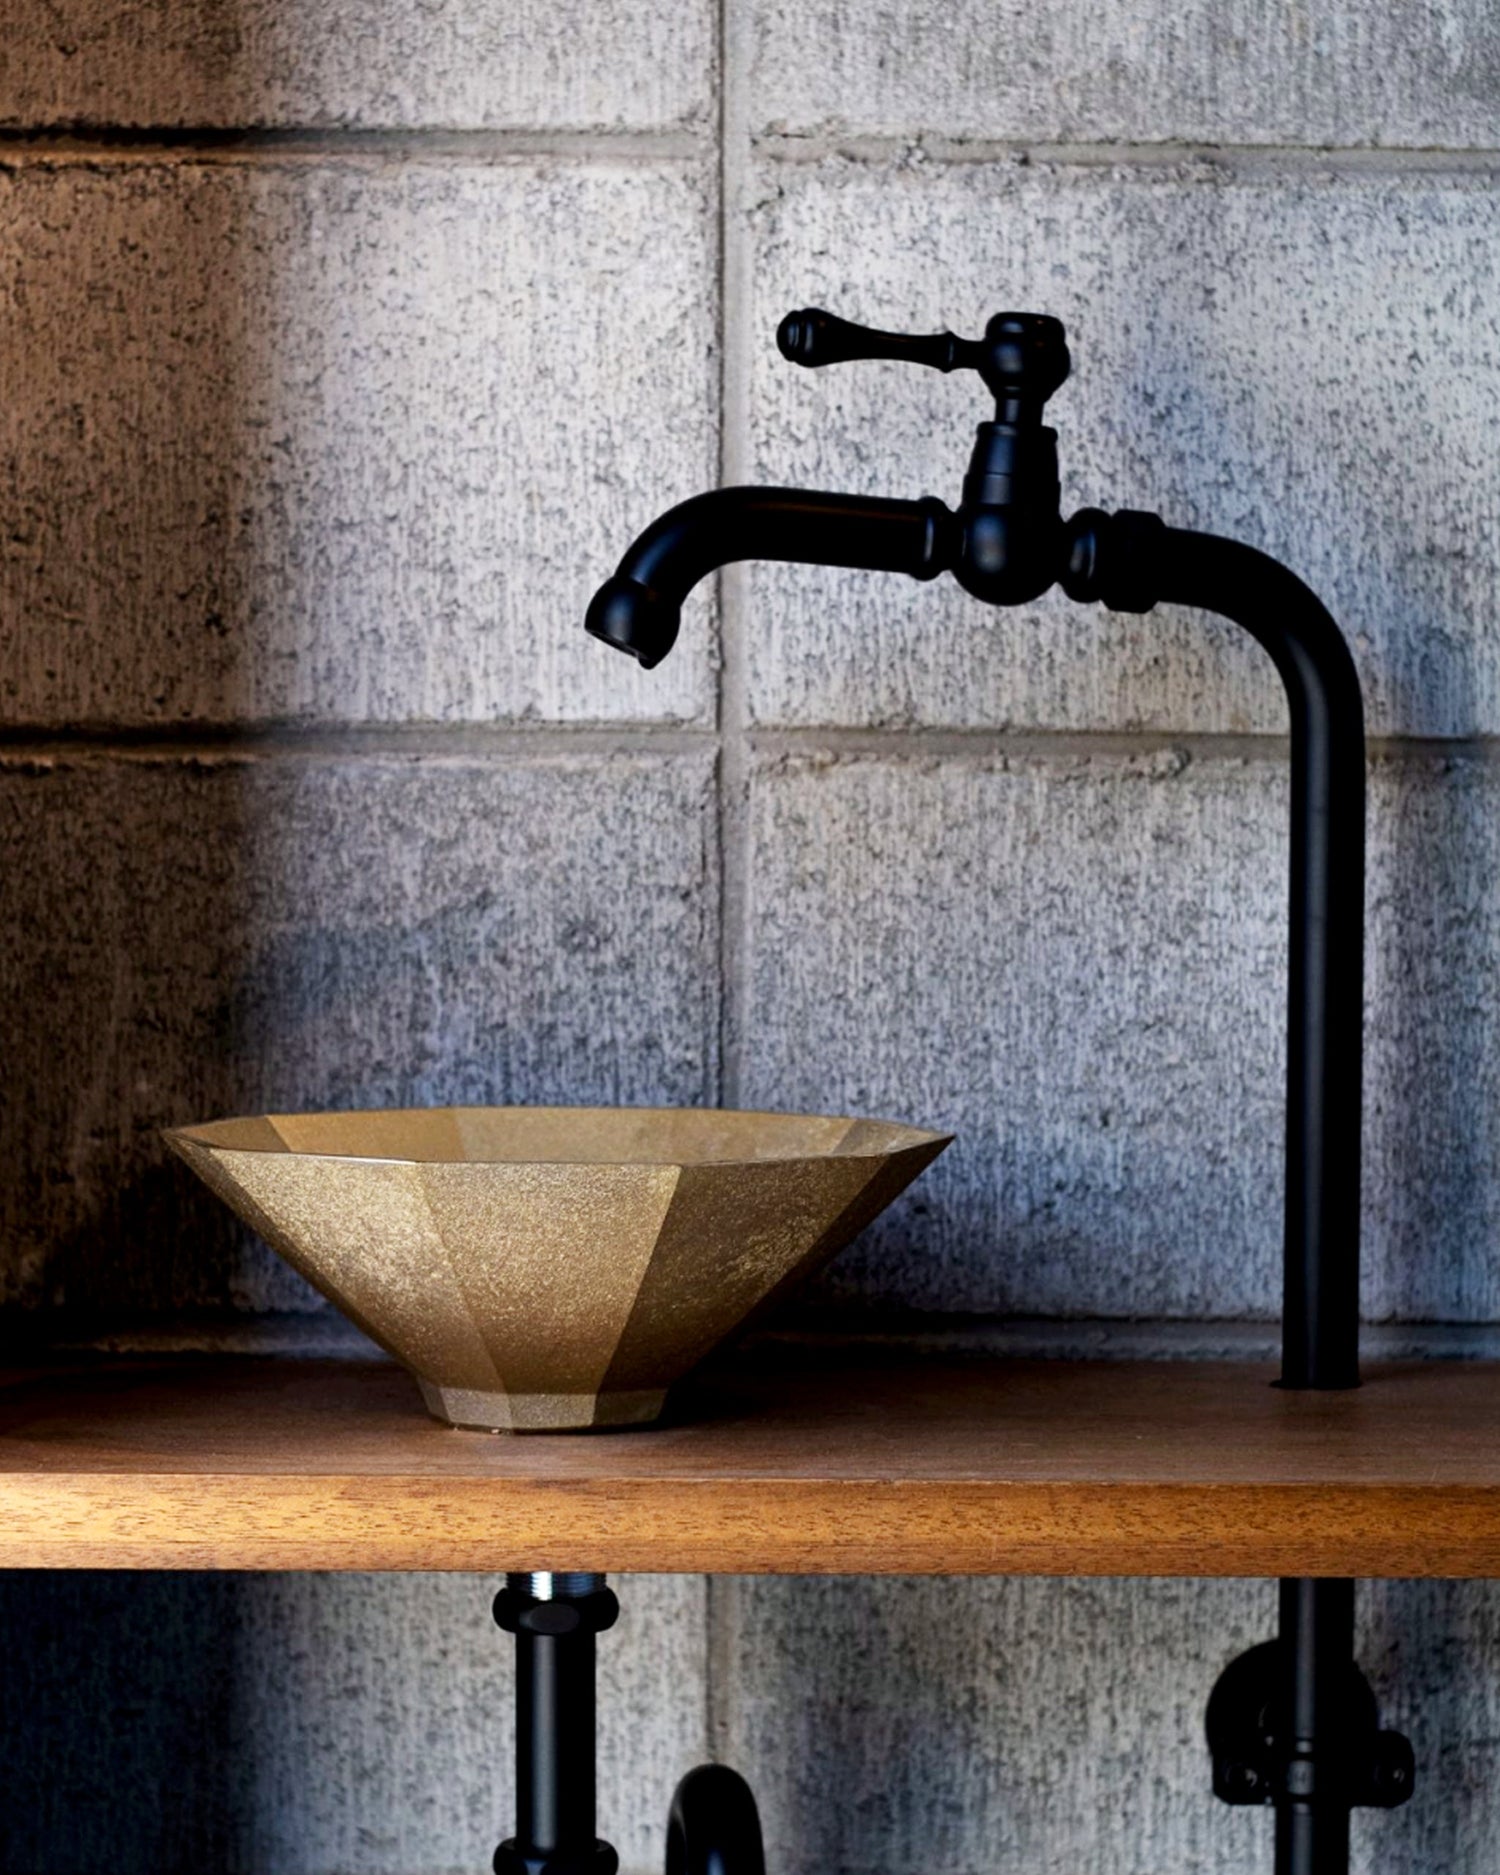 Matureware wash bowl is installed on a wooden countertop, connected to a black pipe and faucet. 